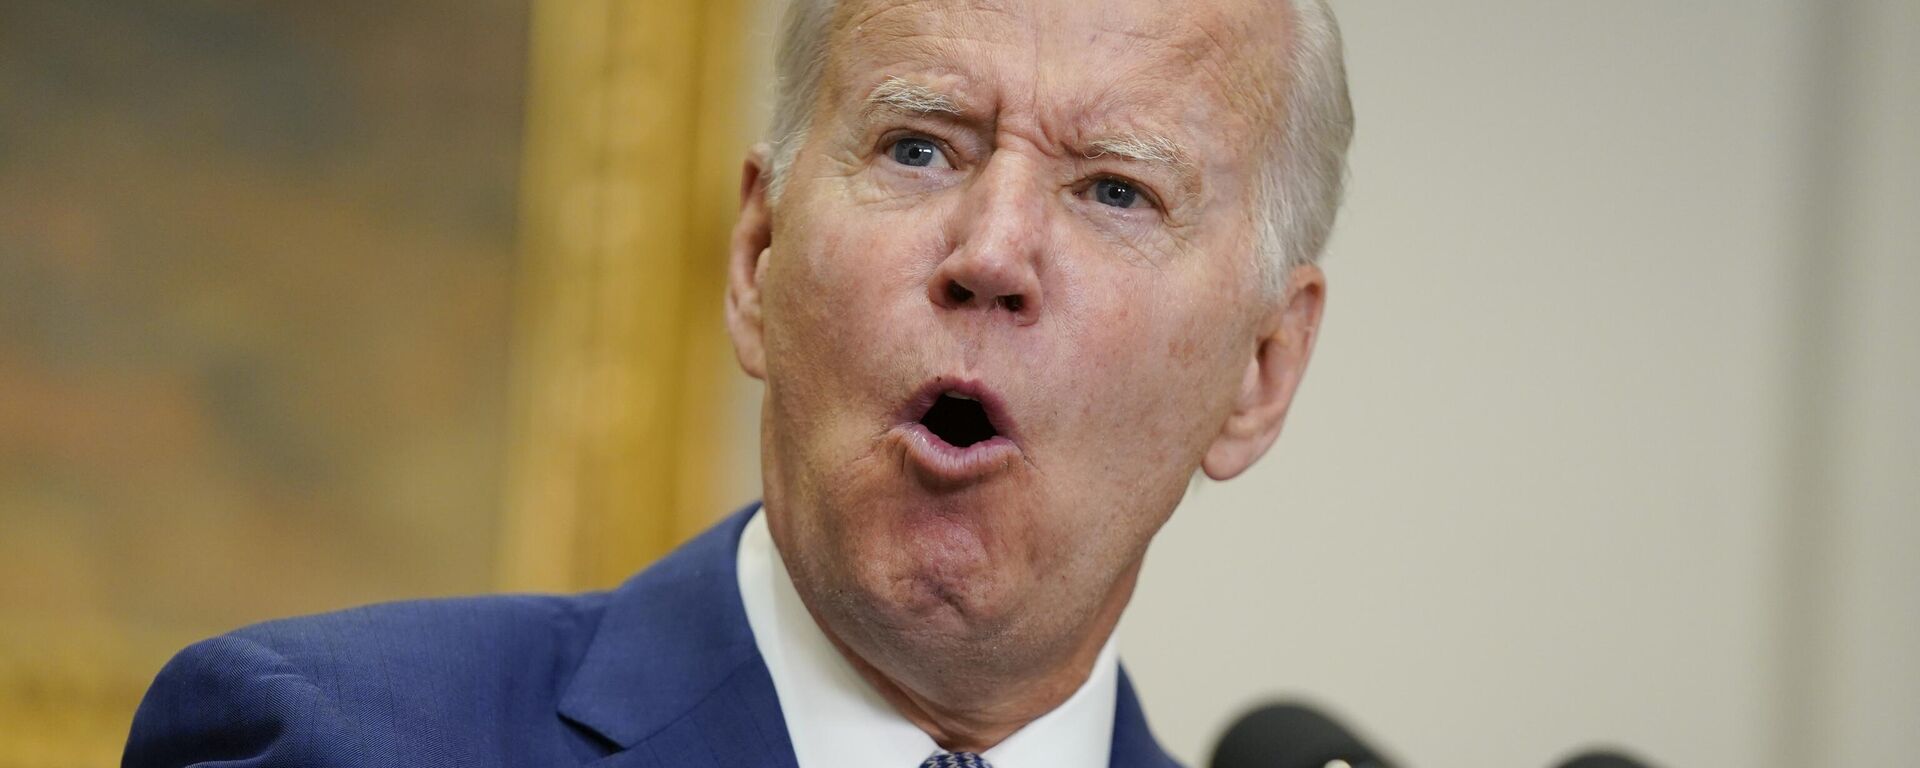 President Joe Biden speaks about abortion access during an event in the Roosevelt Room of the White House, Friday, July 8, 2022, in Washington. - Sputnik Africa, 1920, 14.12.2023